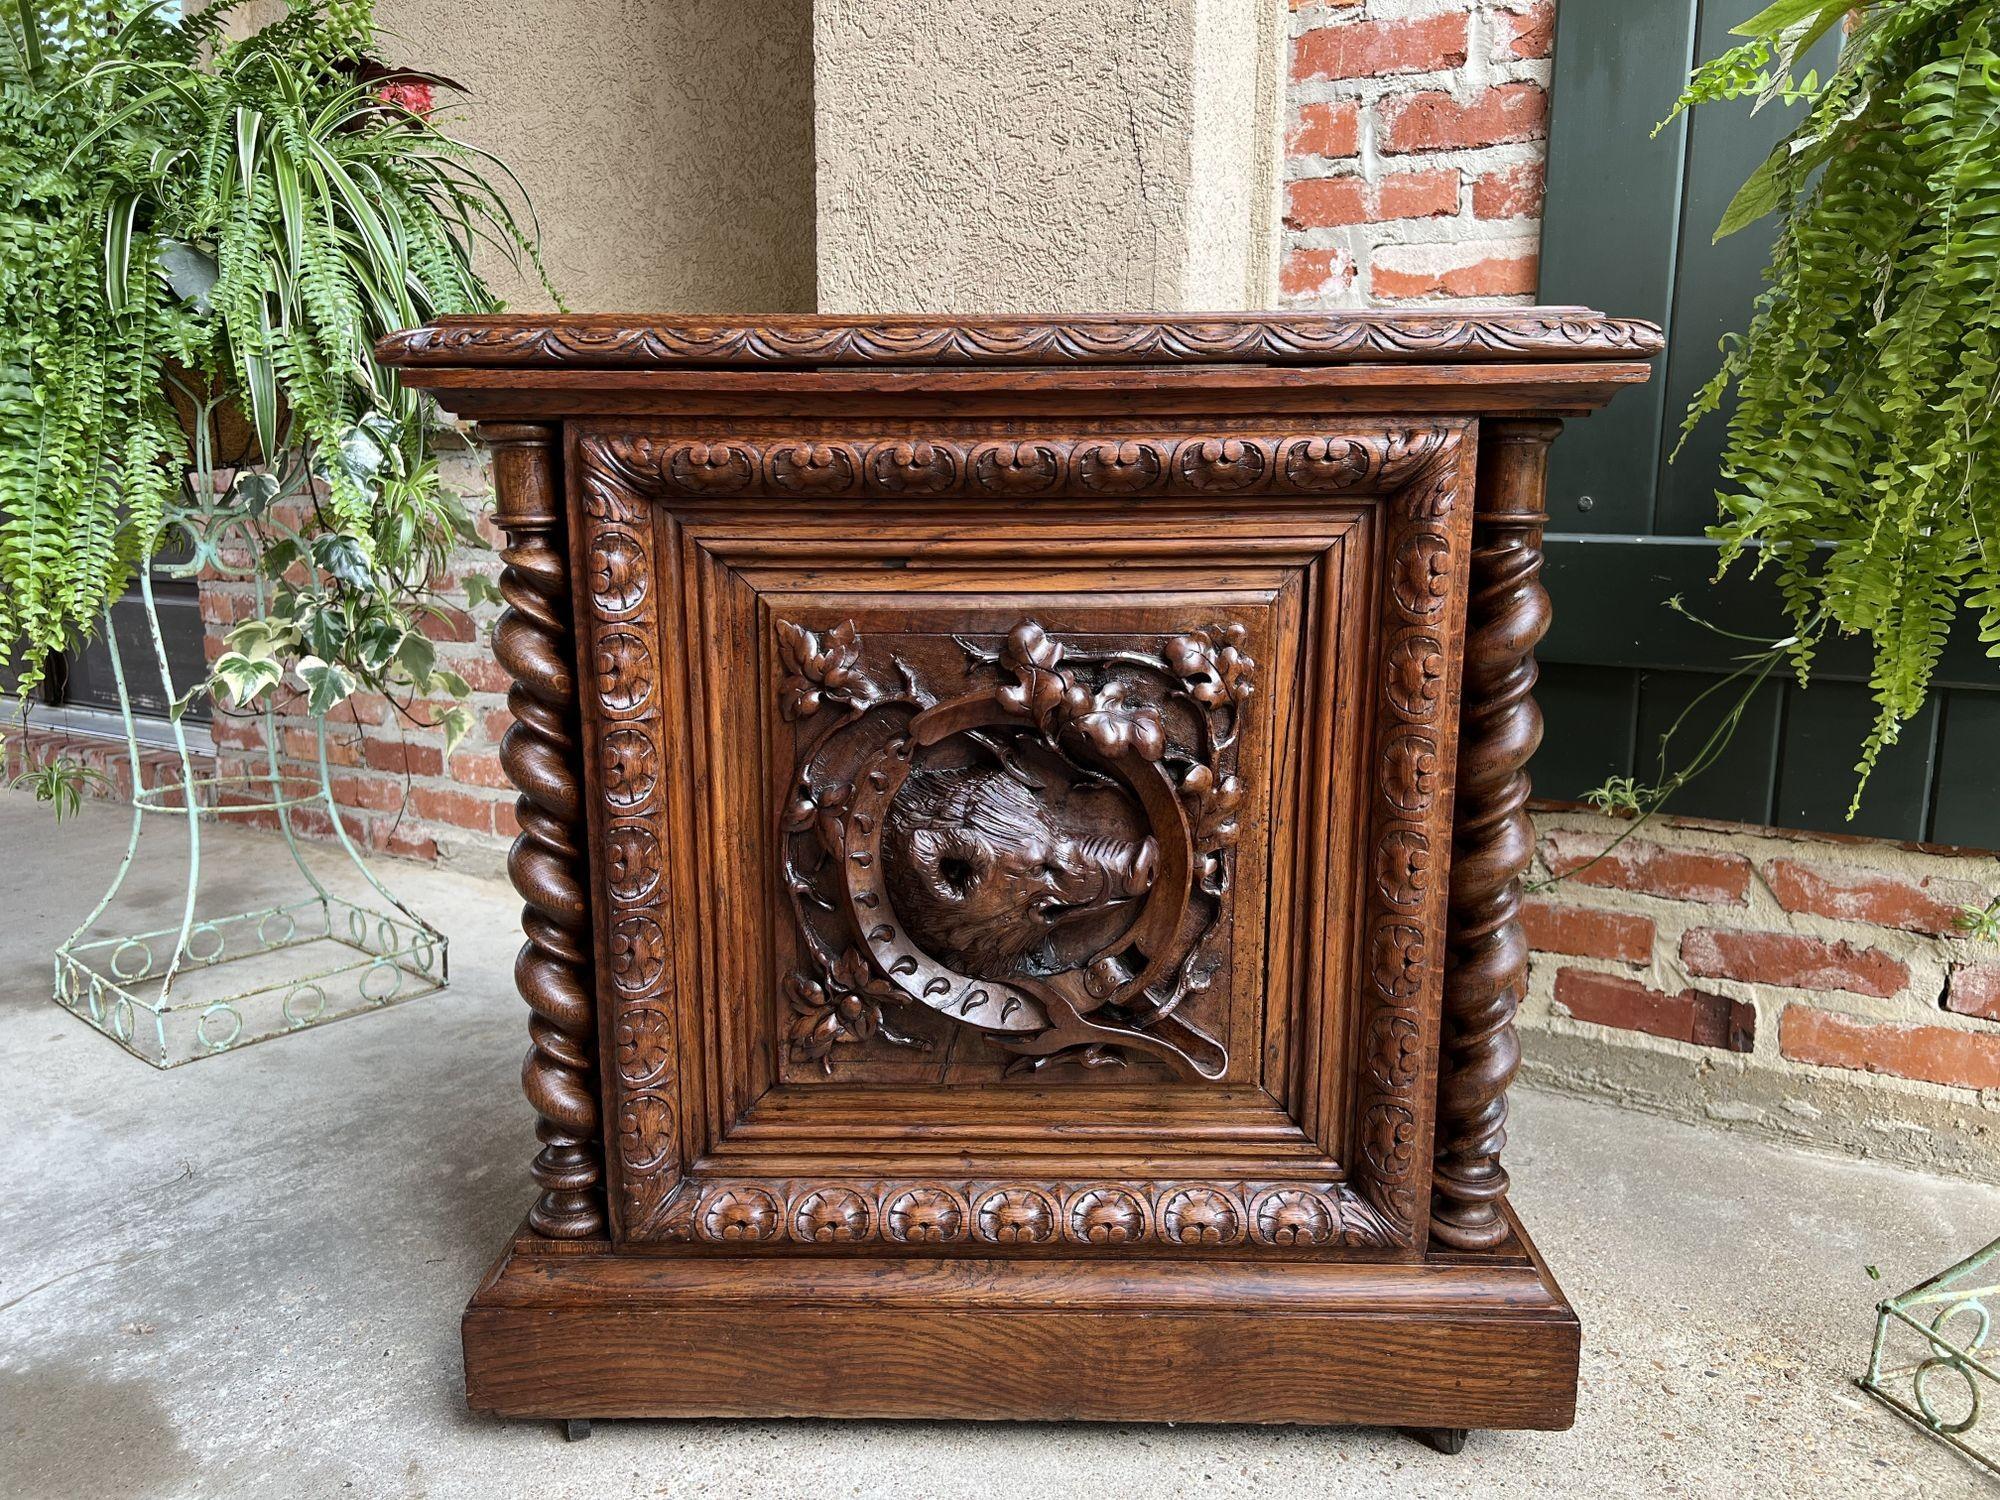 19th century French carved wine Cellarette cabinet black forest chest hog boar.
 
Direct from France, a beautiful 19th century chest, heavily carved, most probably originally used as a wine cellarette. 
Fully carved cabinet top with carved lunette